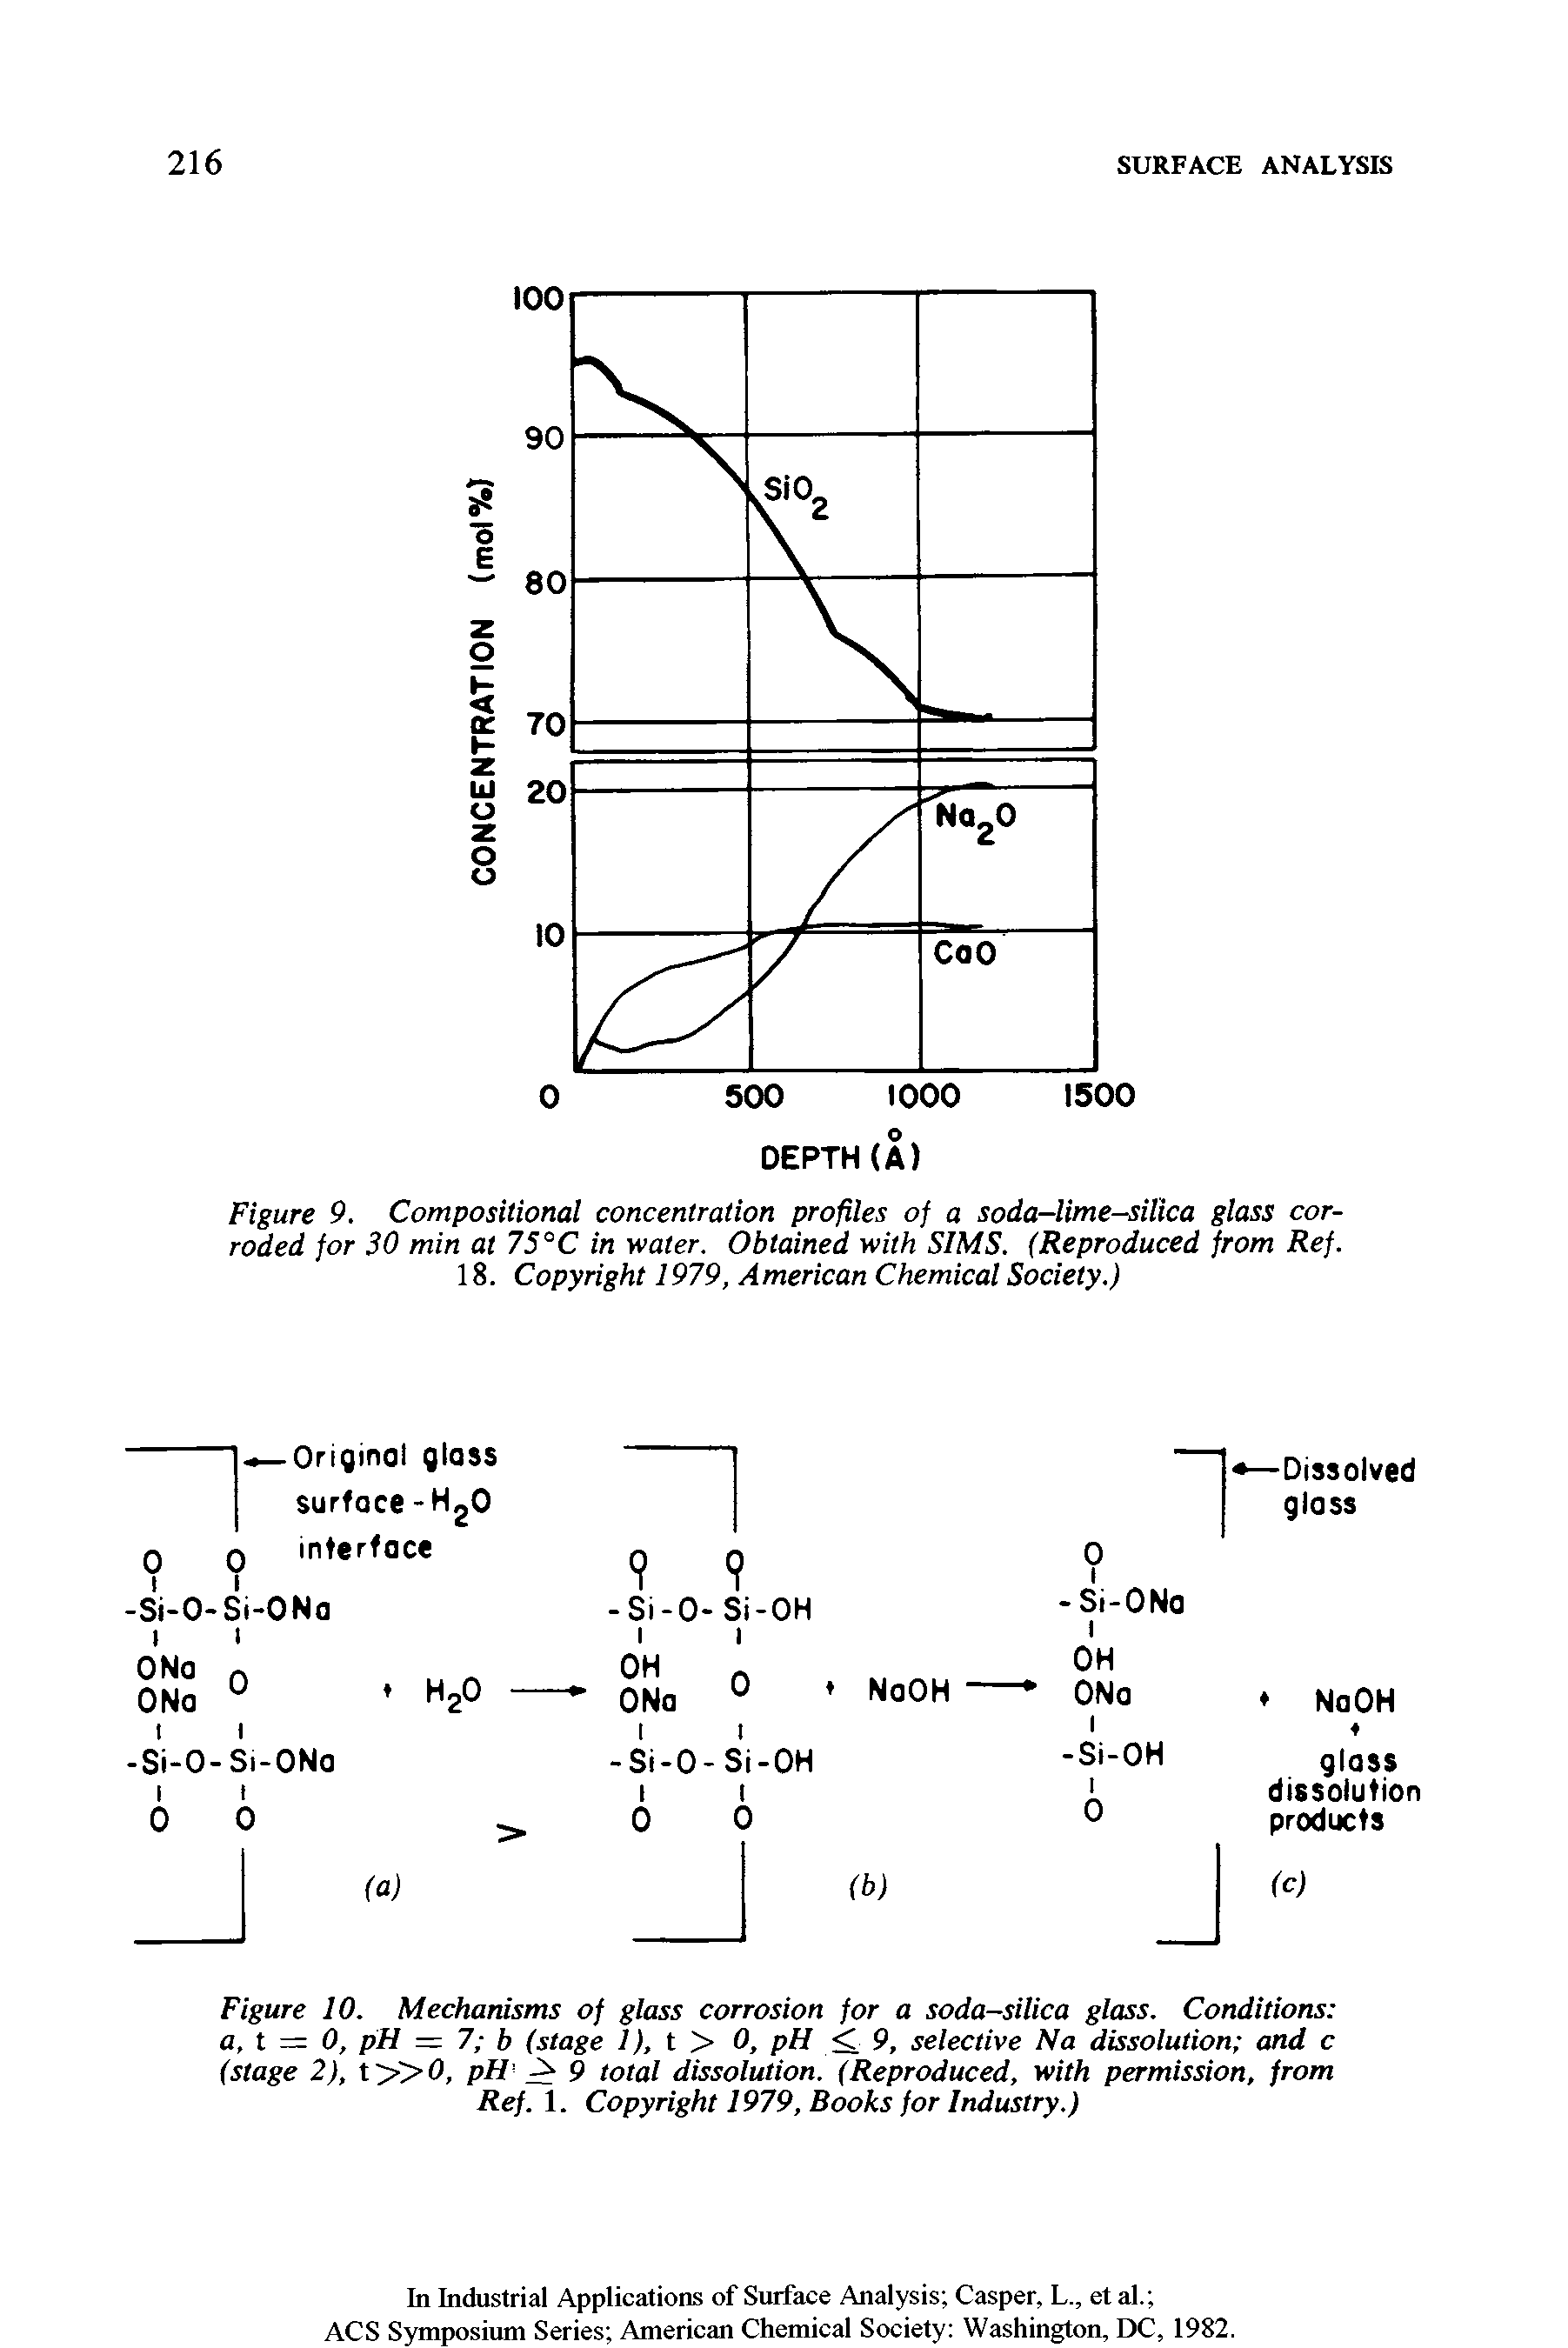 Figure 9. Compositional concentration profiles of a soda-lime-silica glass corroded for 30 min at 75°C in water. Obtained with SIMS. (Reproduced from Ref. 18. Copyright 1979, American Chemical Society.)...